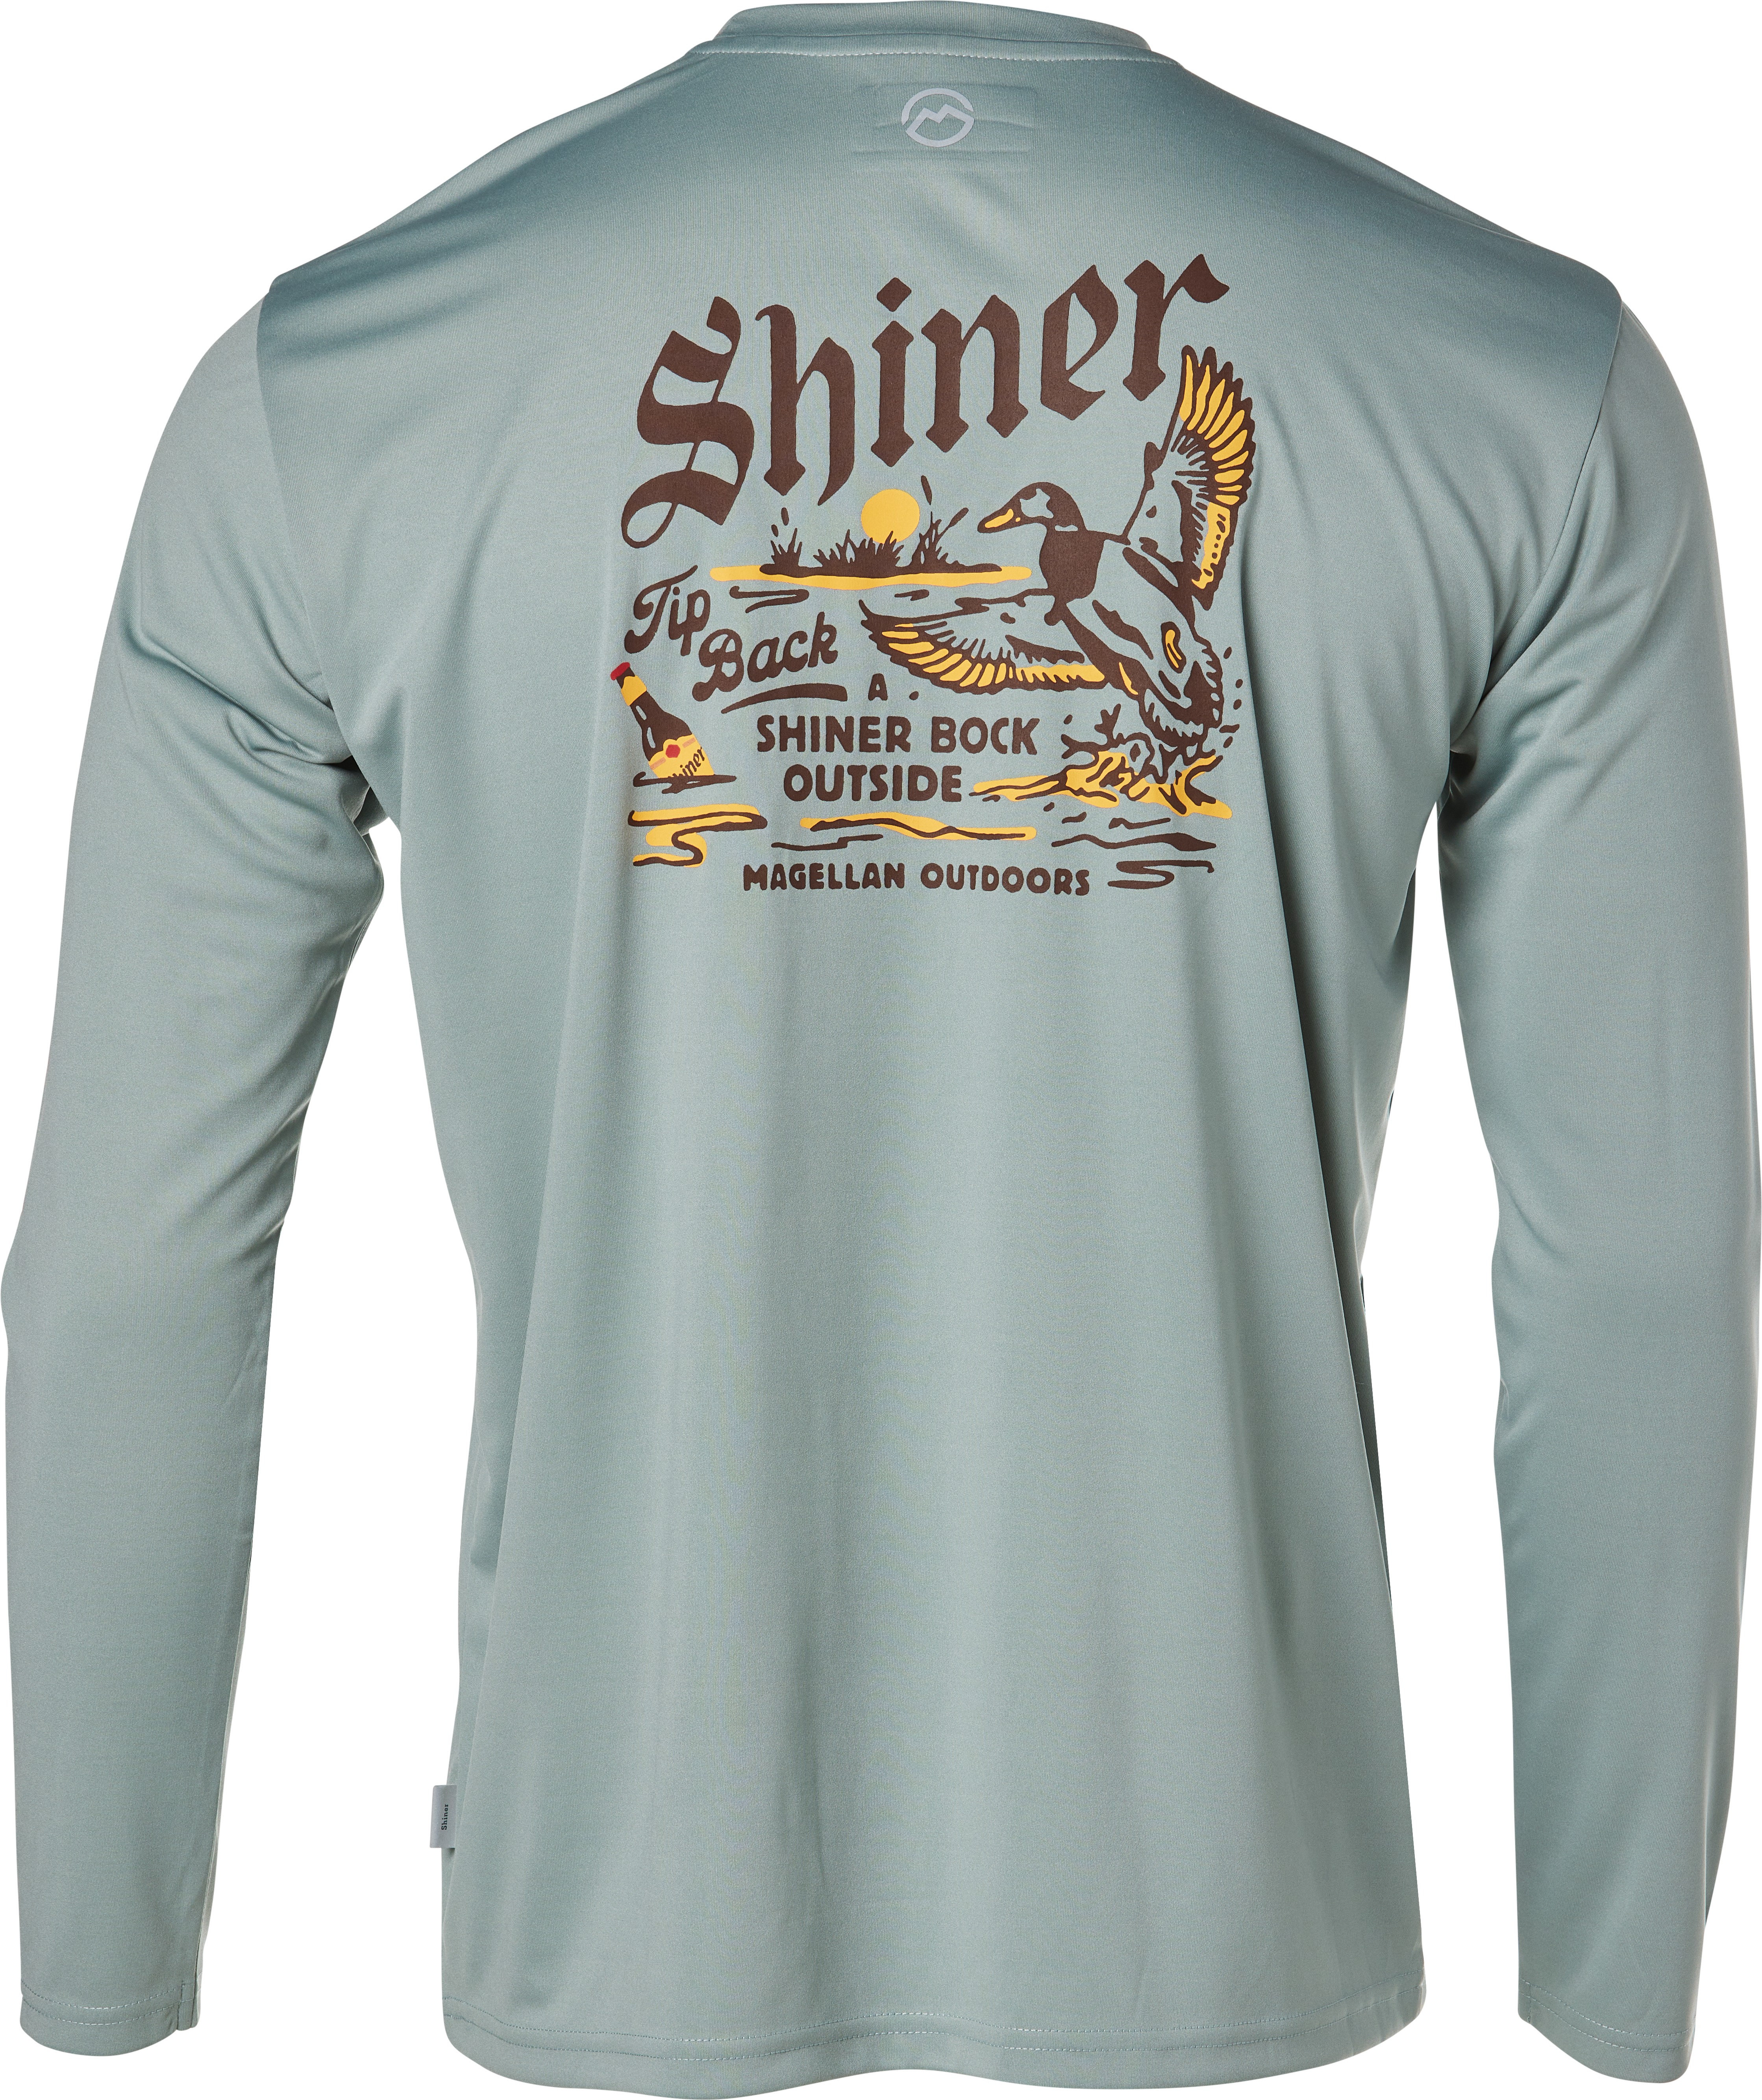 Academy, Shiner Bock collaborate for line of apparel, games, fishing and  camping gear